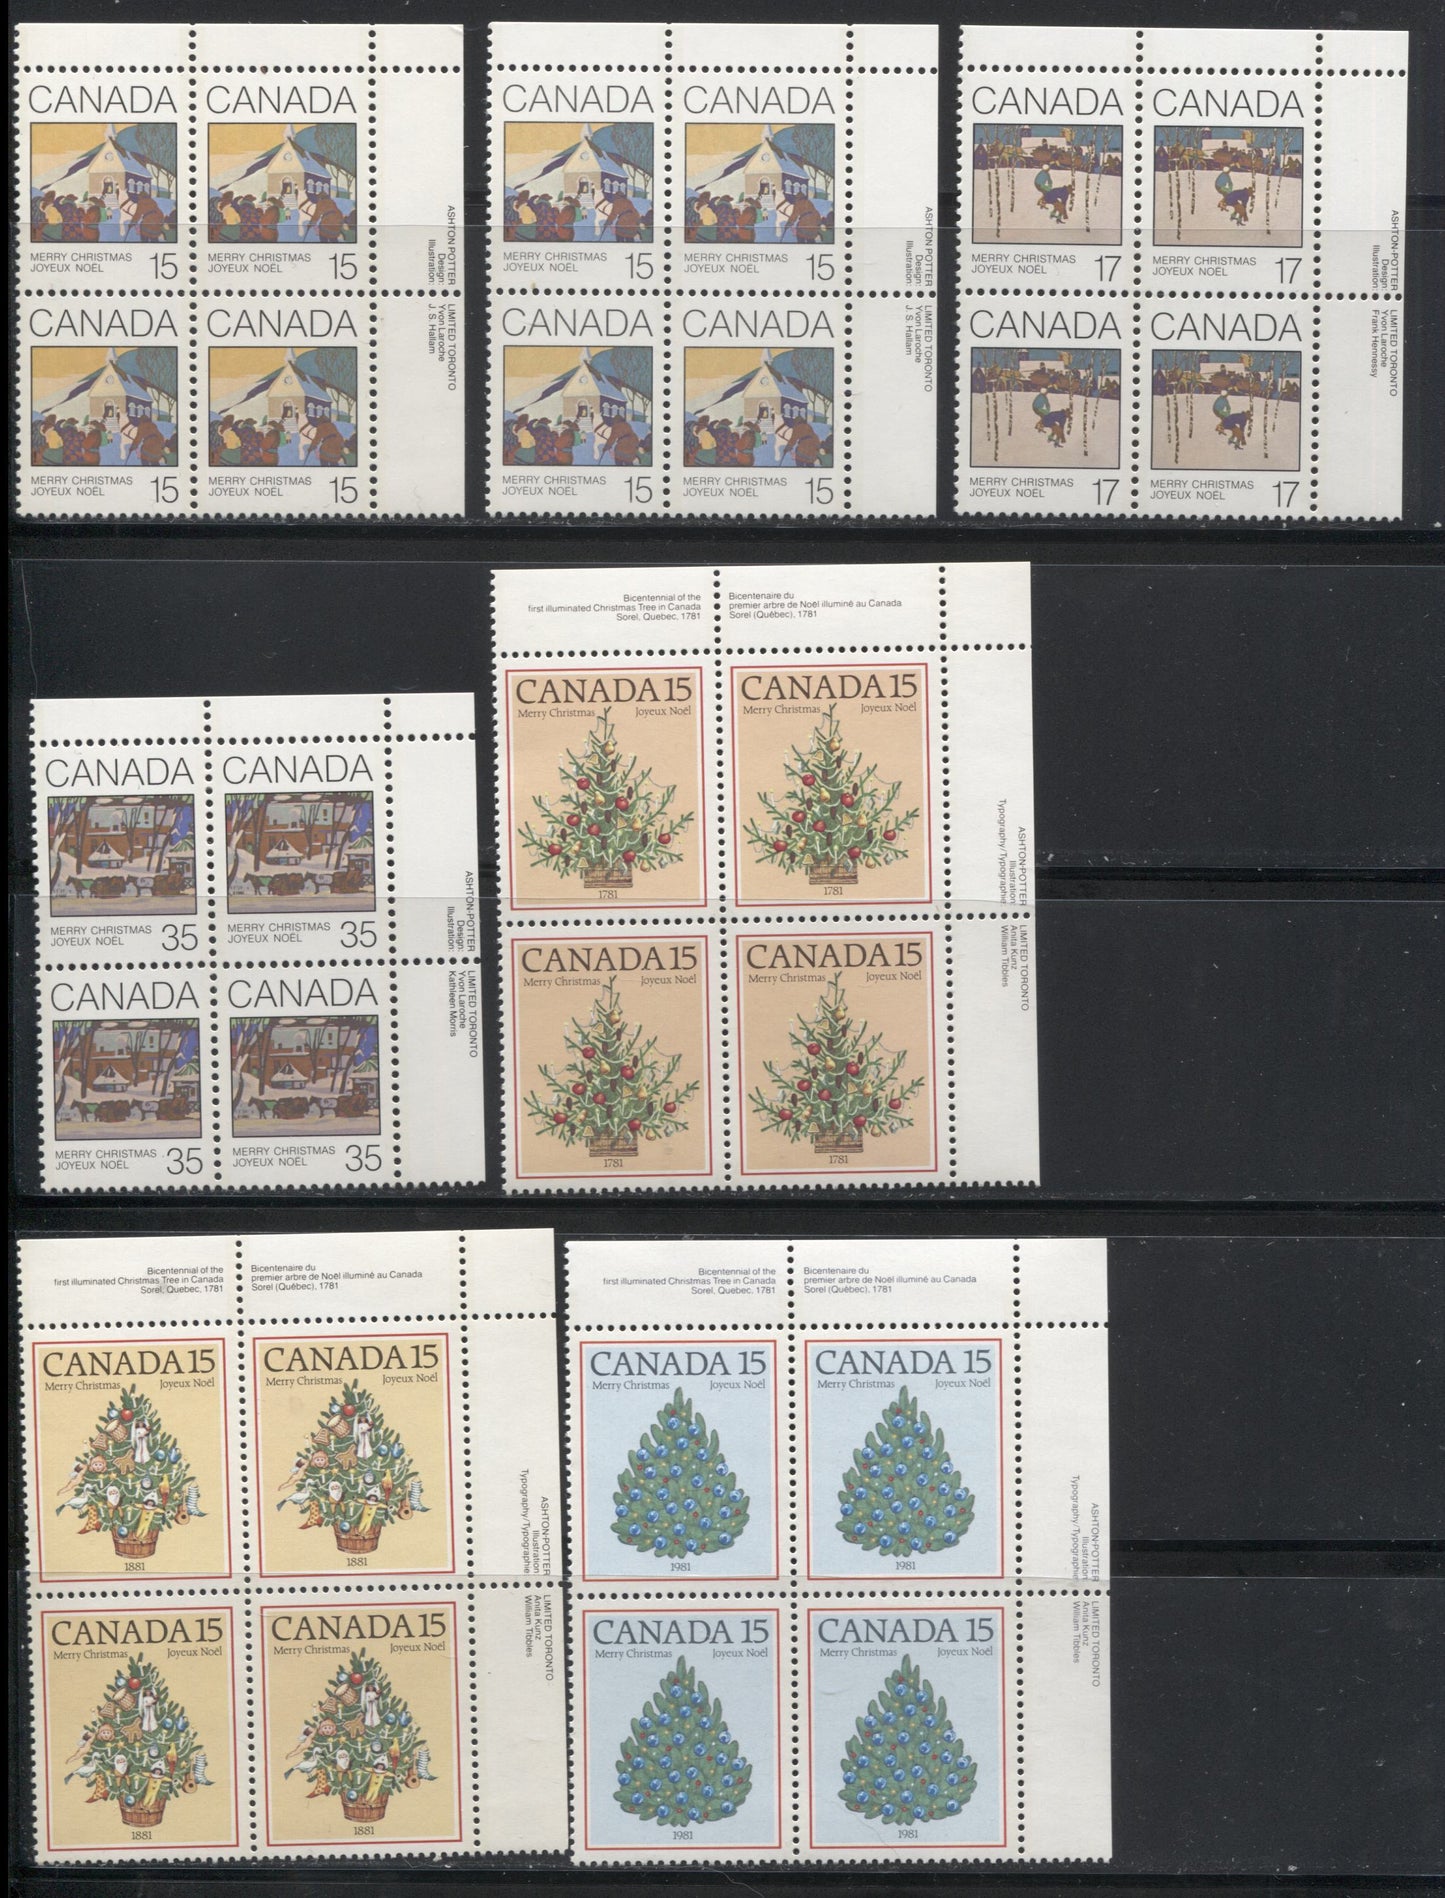 Lot 205 Canada #870/973 1980-1982 Christmas Issues - A Group of 8 Upper Right Inscription Blocks on DF/NF or DF Paper